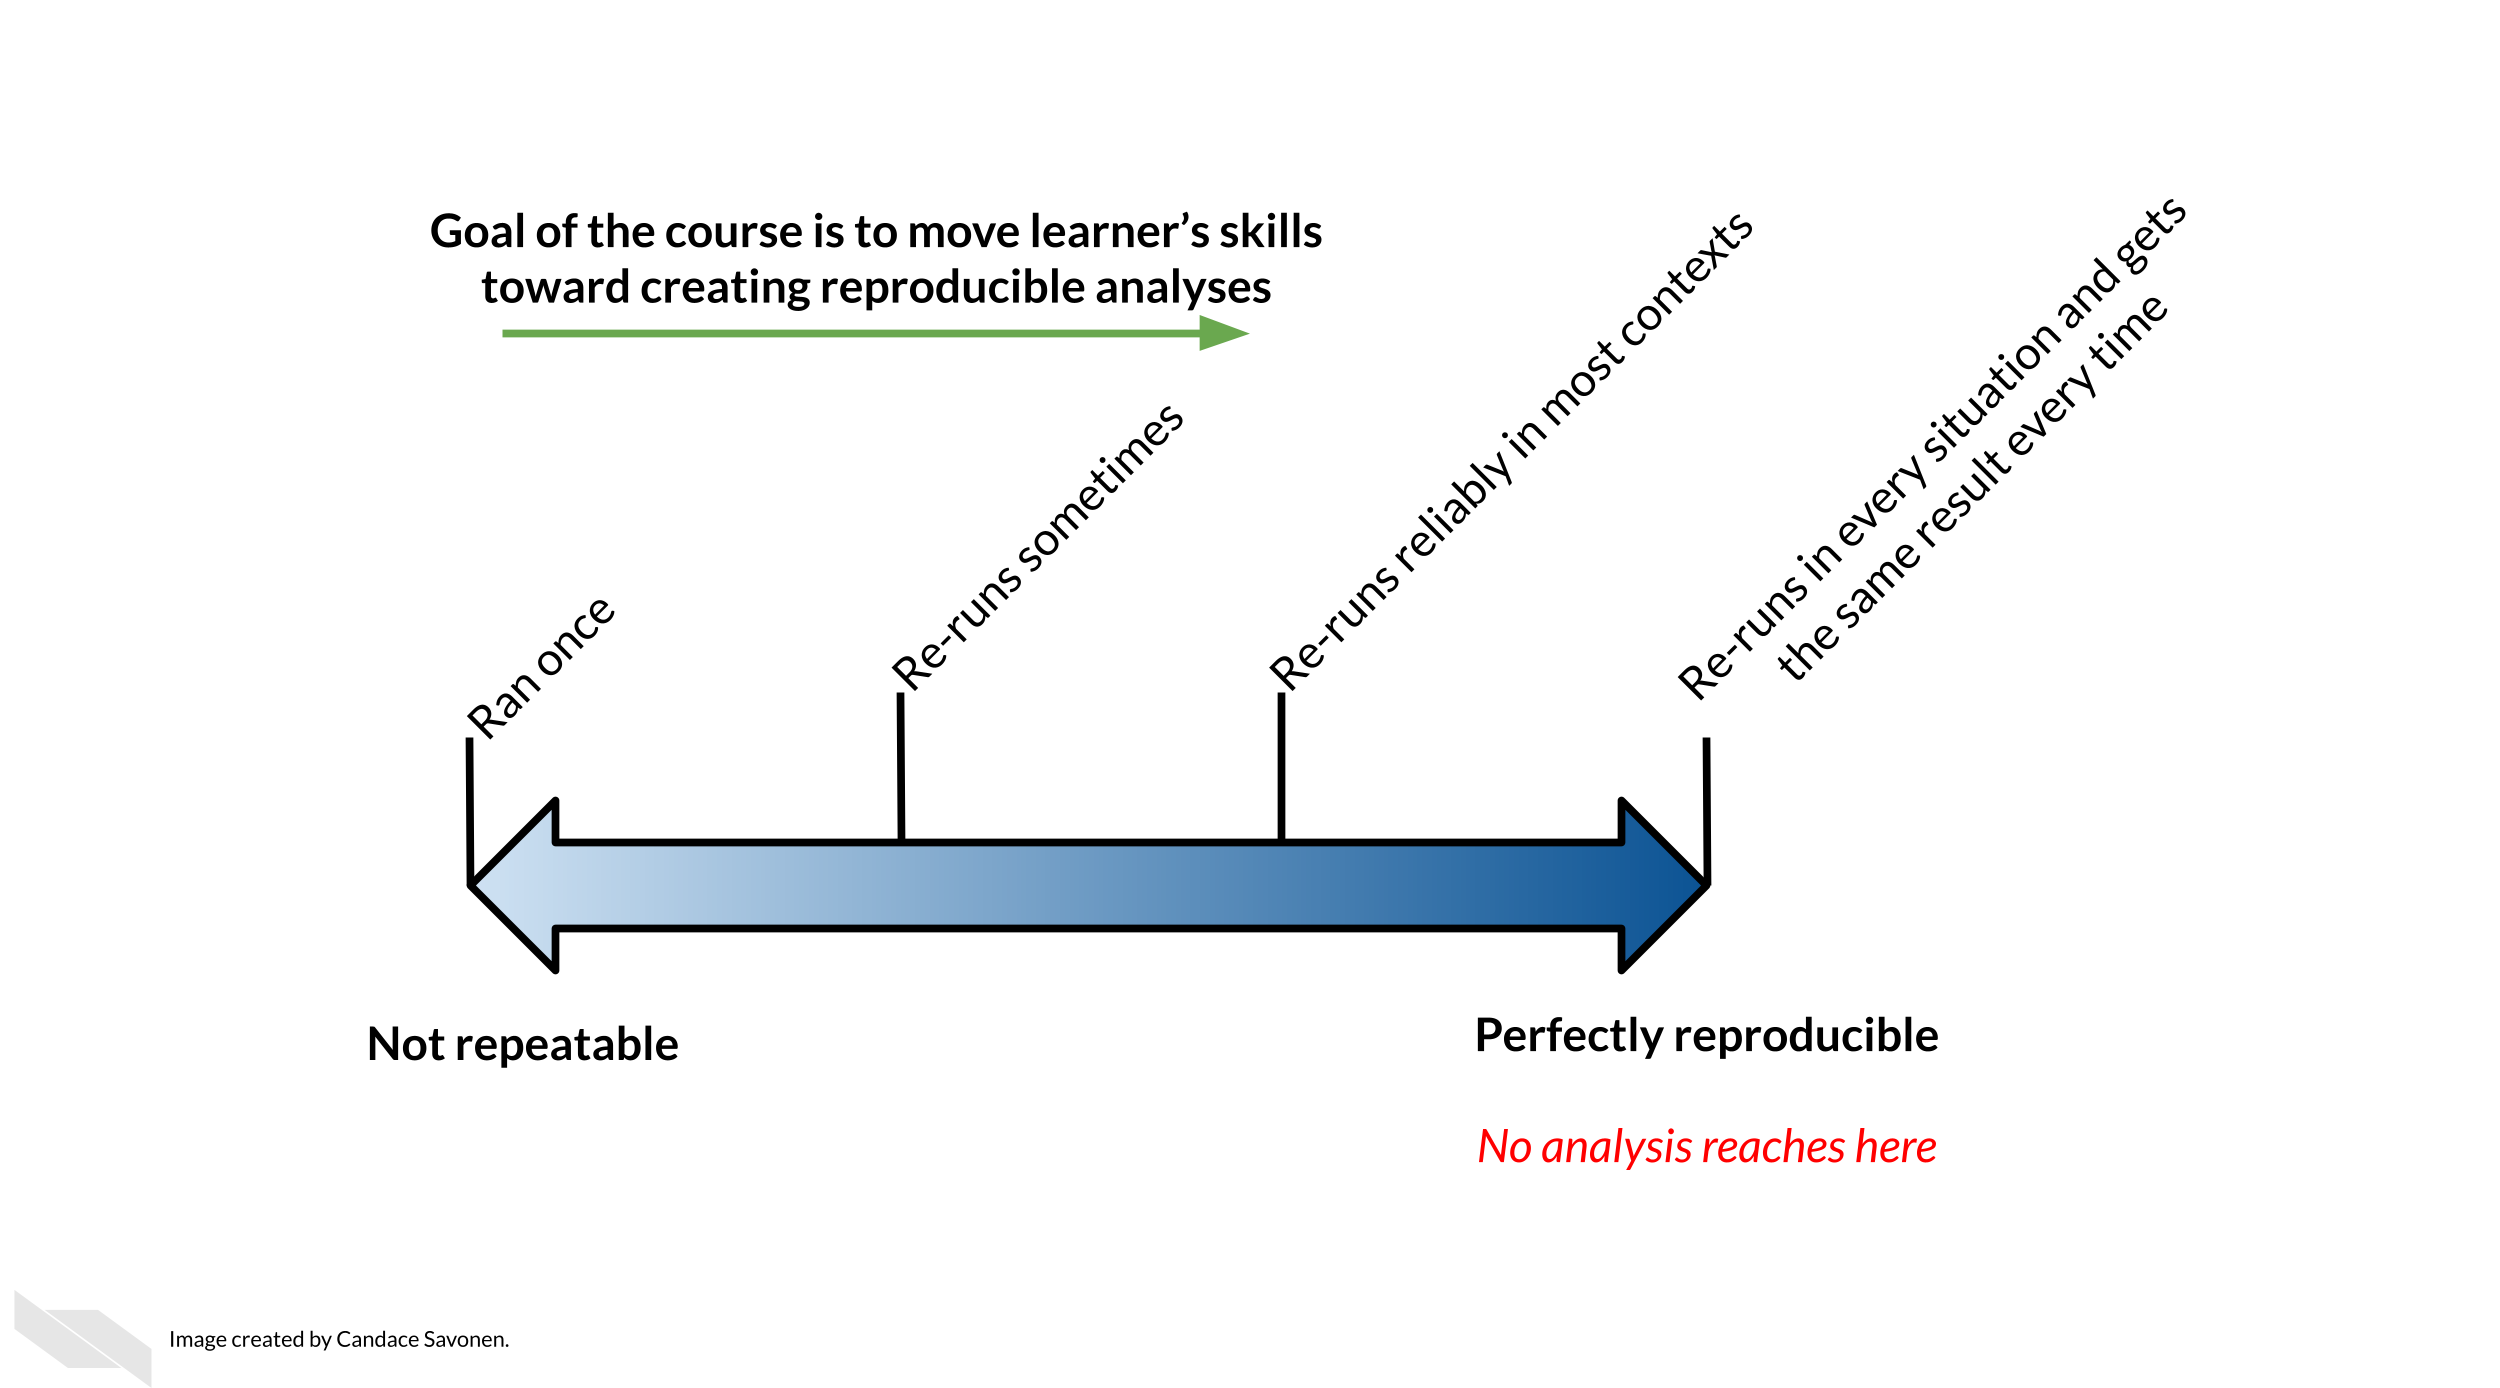 Reproducibility is on a continuum. Goal of the course is to move learner’s skills toward creating reproducible analyses. This graph shows a two sided arrow with a gradient. On the very left is a ‘not repeatable analysis’ it was ran once. To the right of that is an analysis that ‘re-runs sometimes’. To the right of this, is an analysis that ‘Re-runs reliably in most contexts’.  And all the way to the right is a ‘perfectly reproducible analysis’ that ‘Re-runs in every situation and gets the same result every time’. In red lettering we note that every analysis is started by being run once but no analysis is ‘perfectly reproducible’.